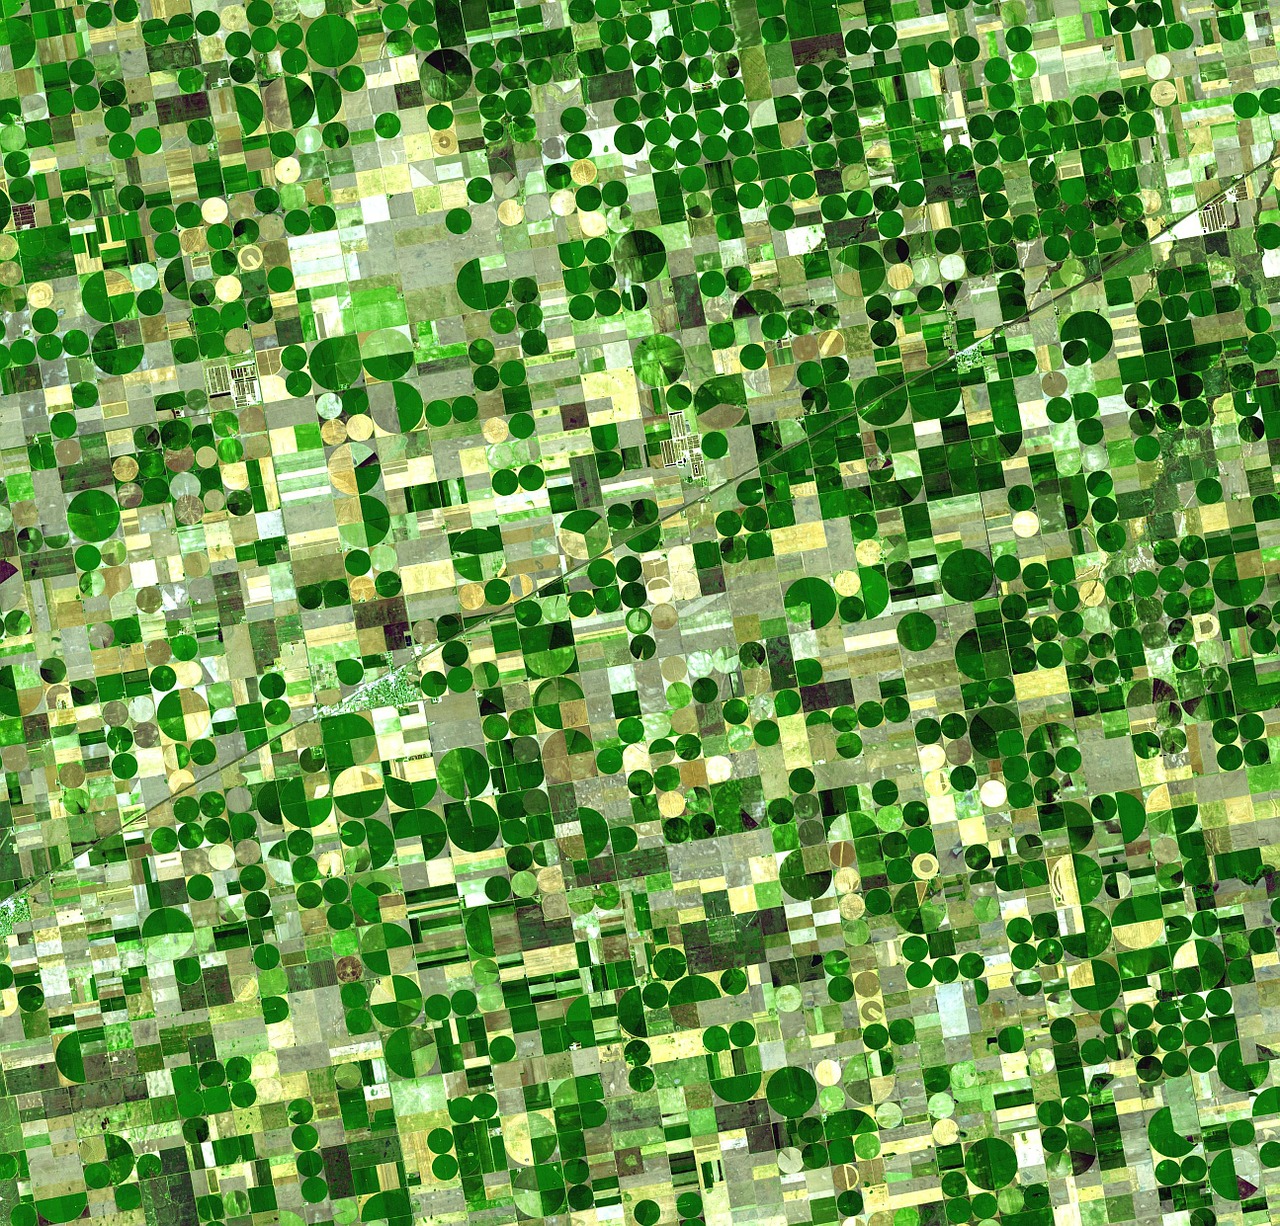 Patterns of argiculture seen from above, circles and squares in shades of green.